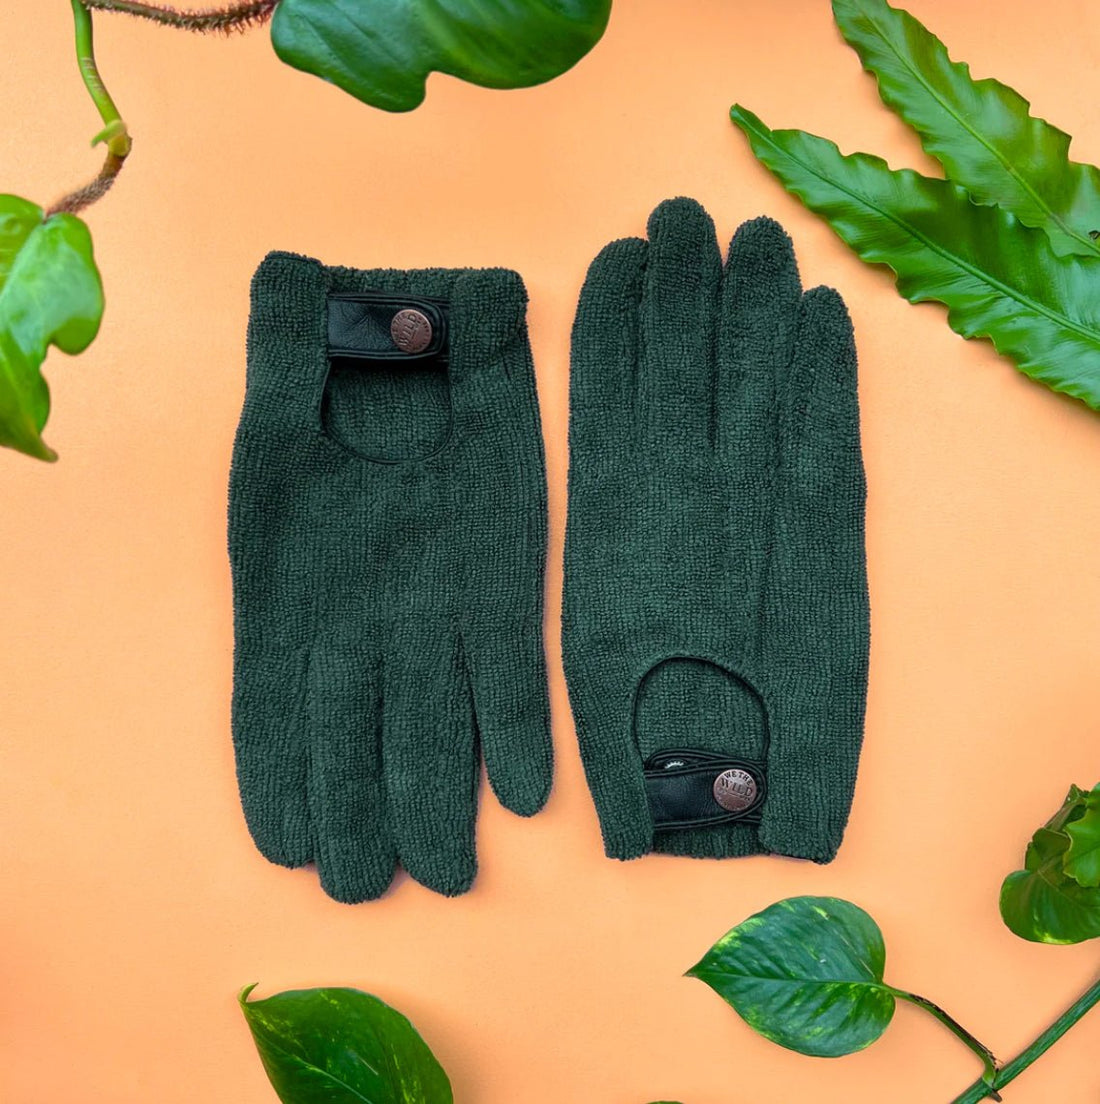 Leaf Cleaning Gloves - The Flower Crate